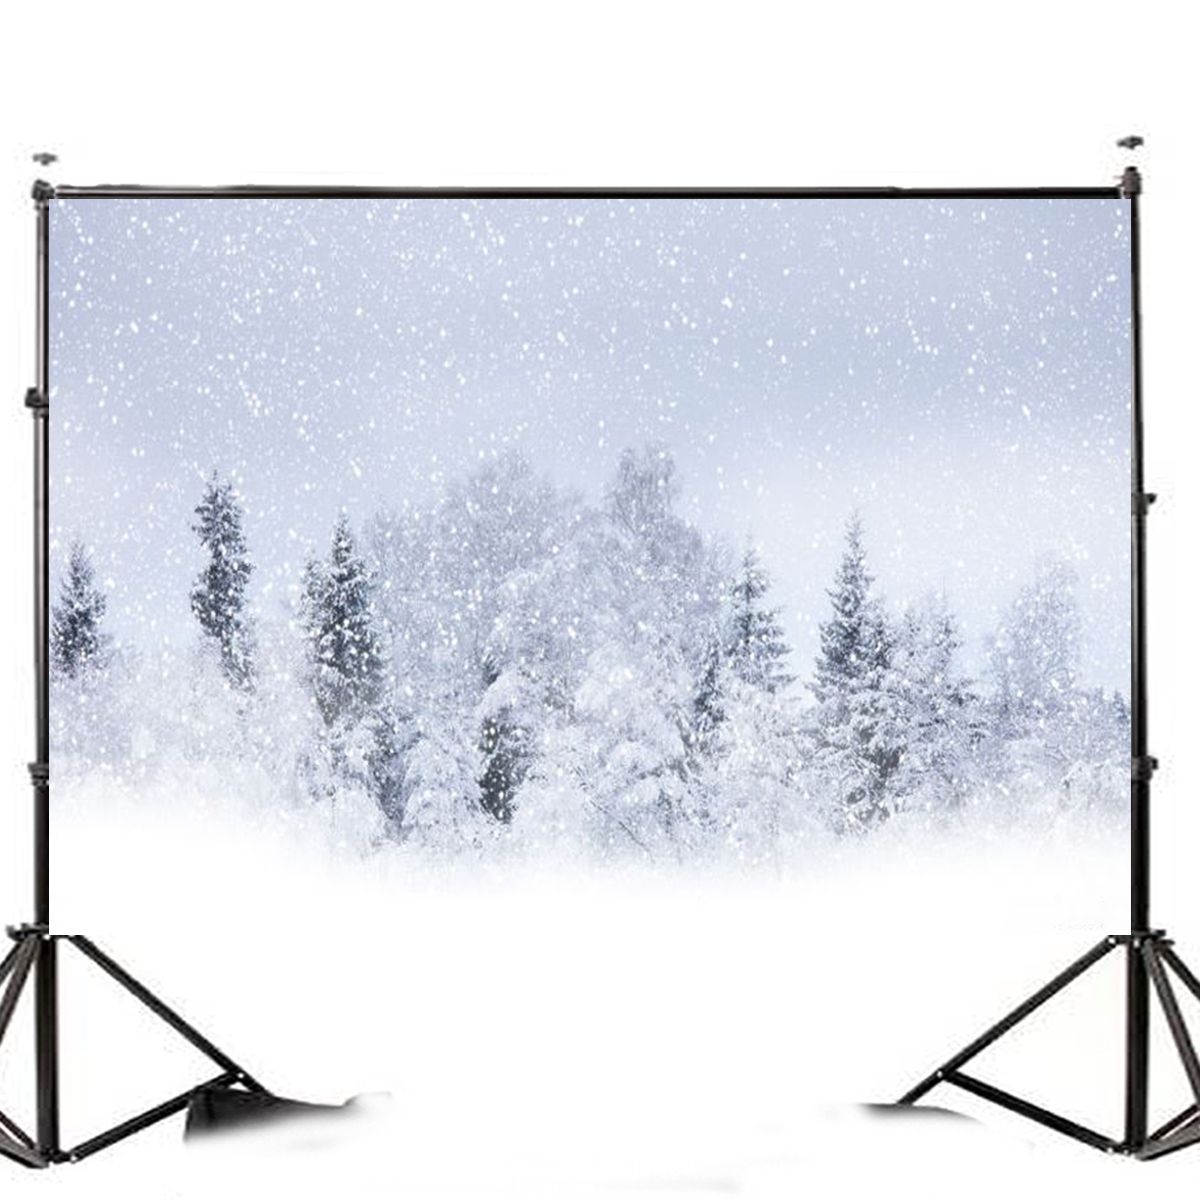 7x5FT-Snow-Covered-Forest-Photography-Background-Studio-Backdrop-21x15m-1237951